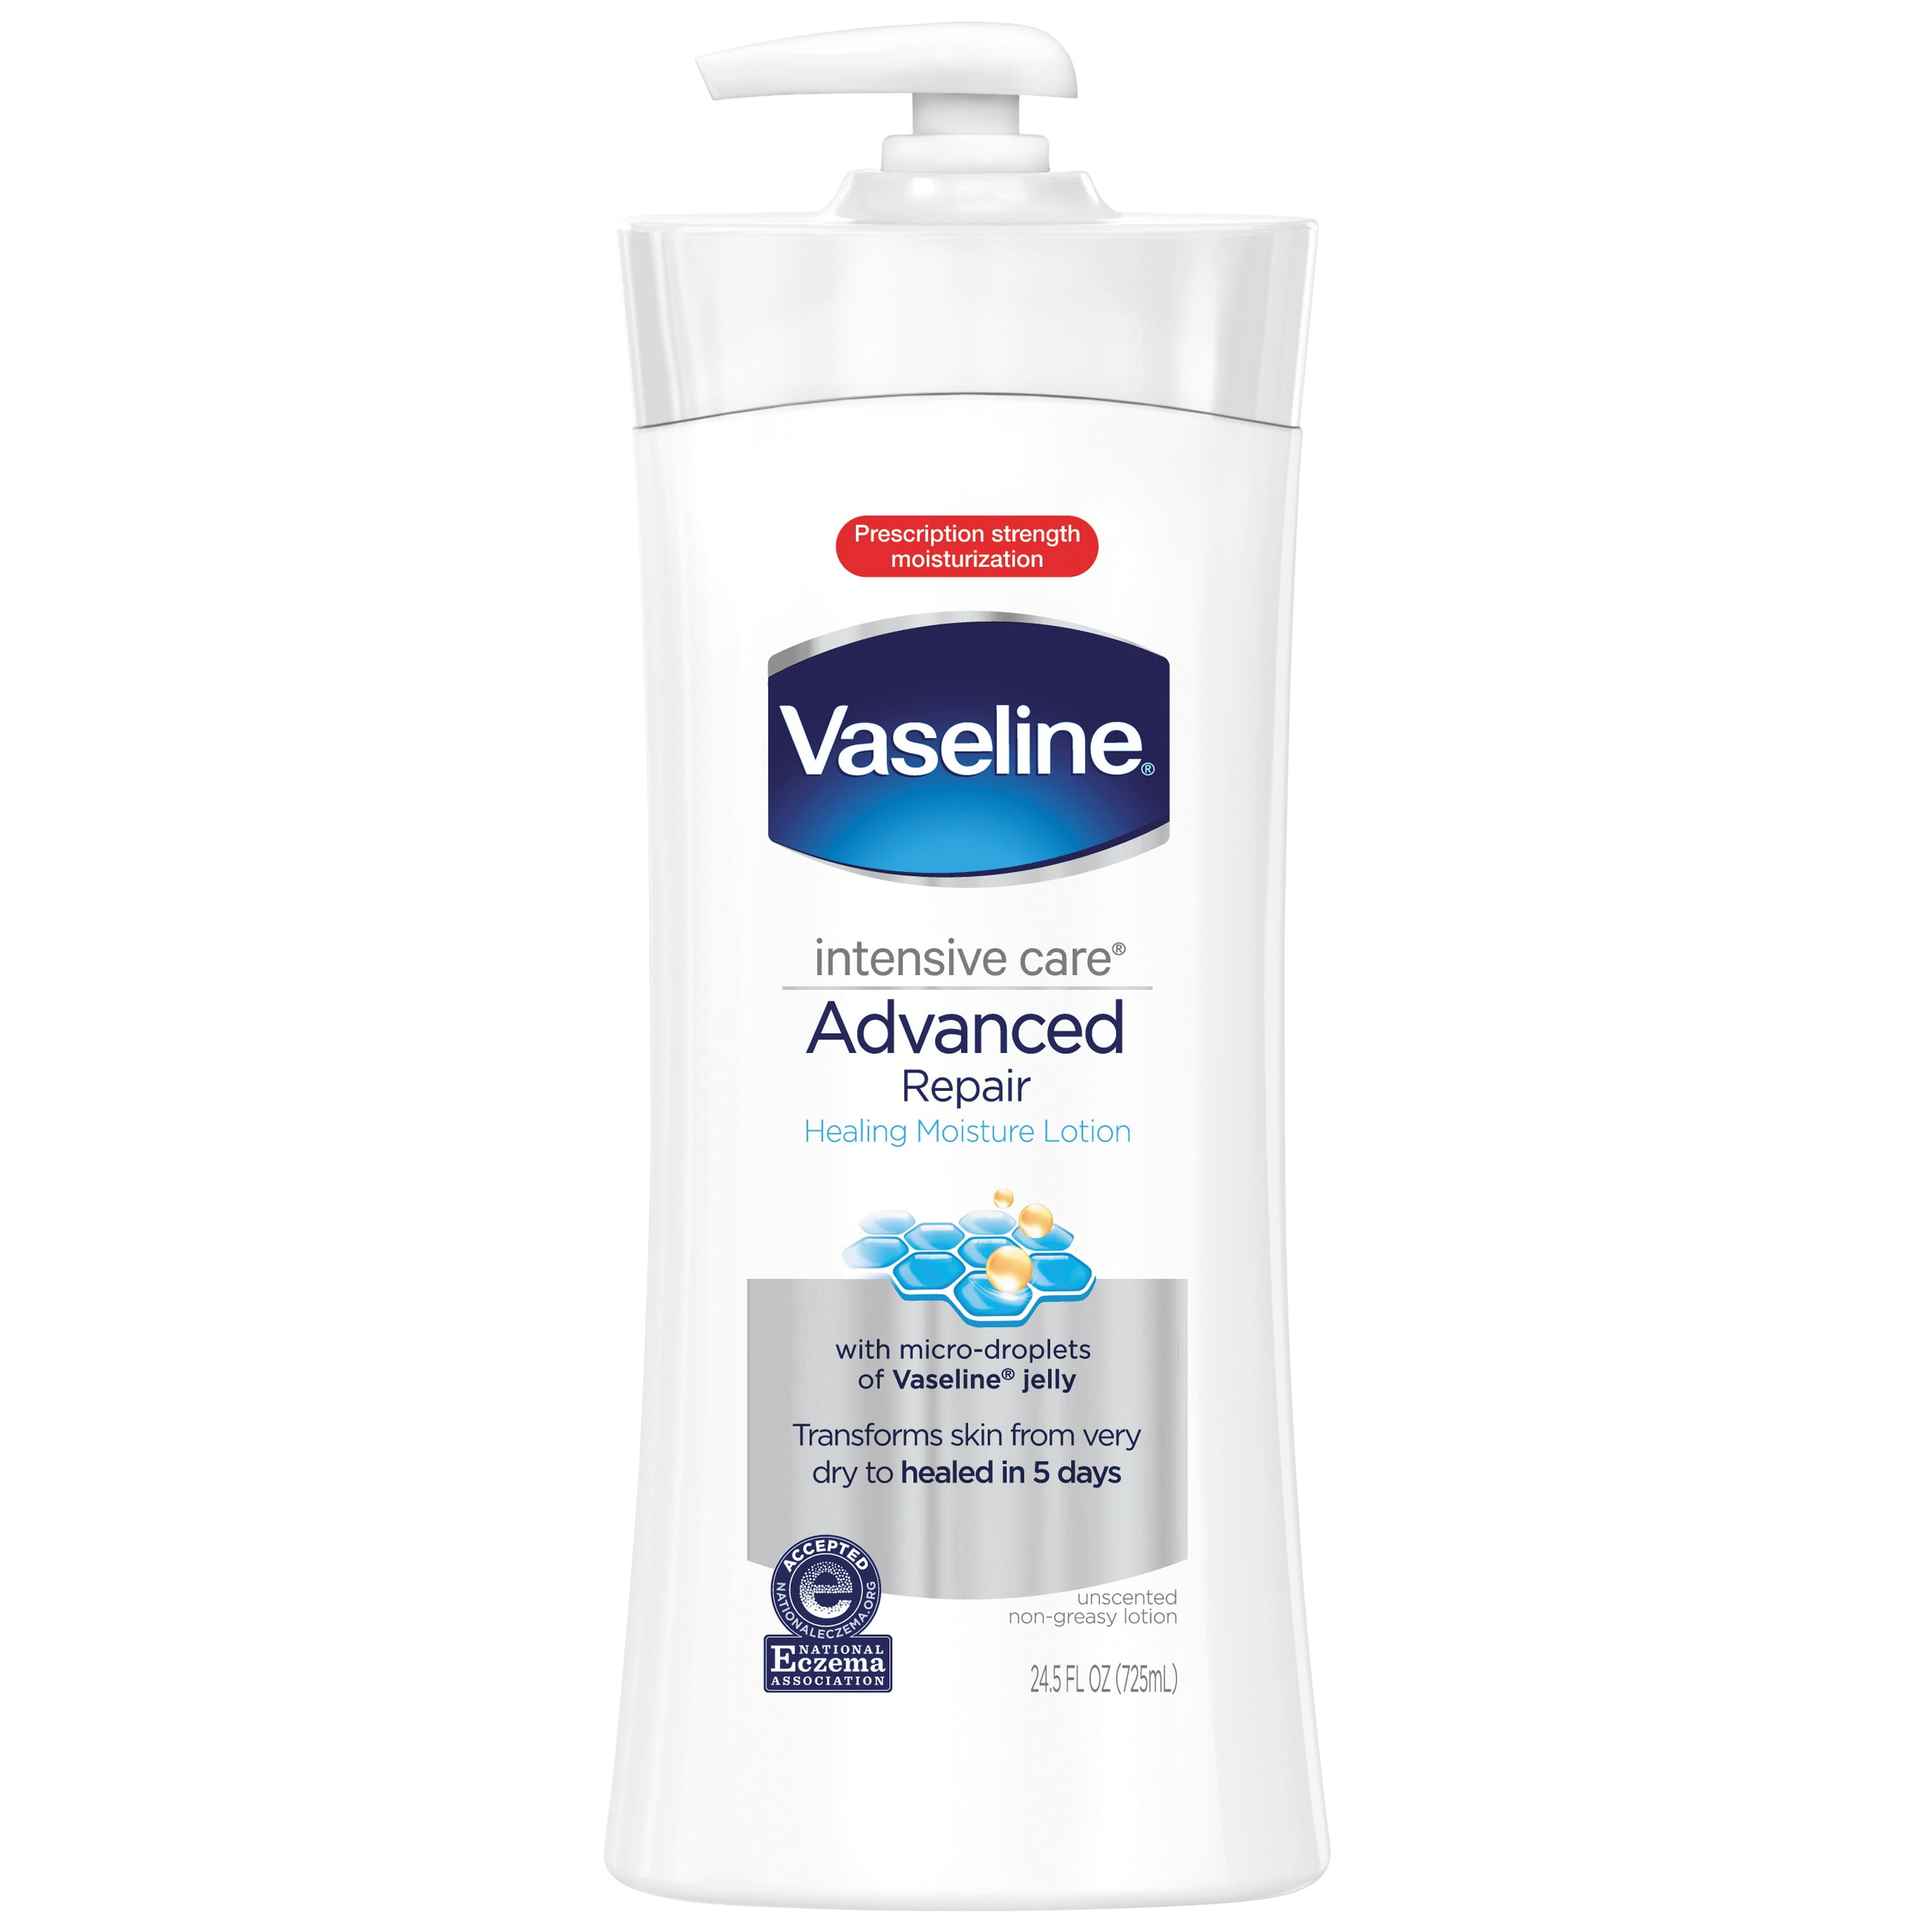 Vaseline Body Lotion Advanced Repair Unscented 24.5 OZ pic